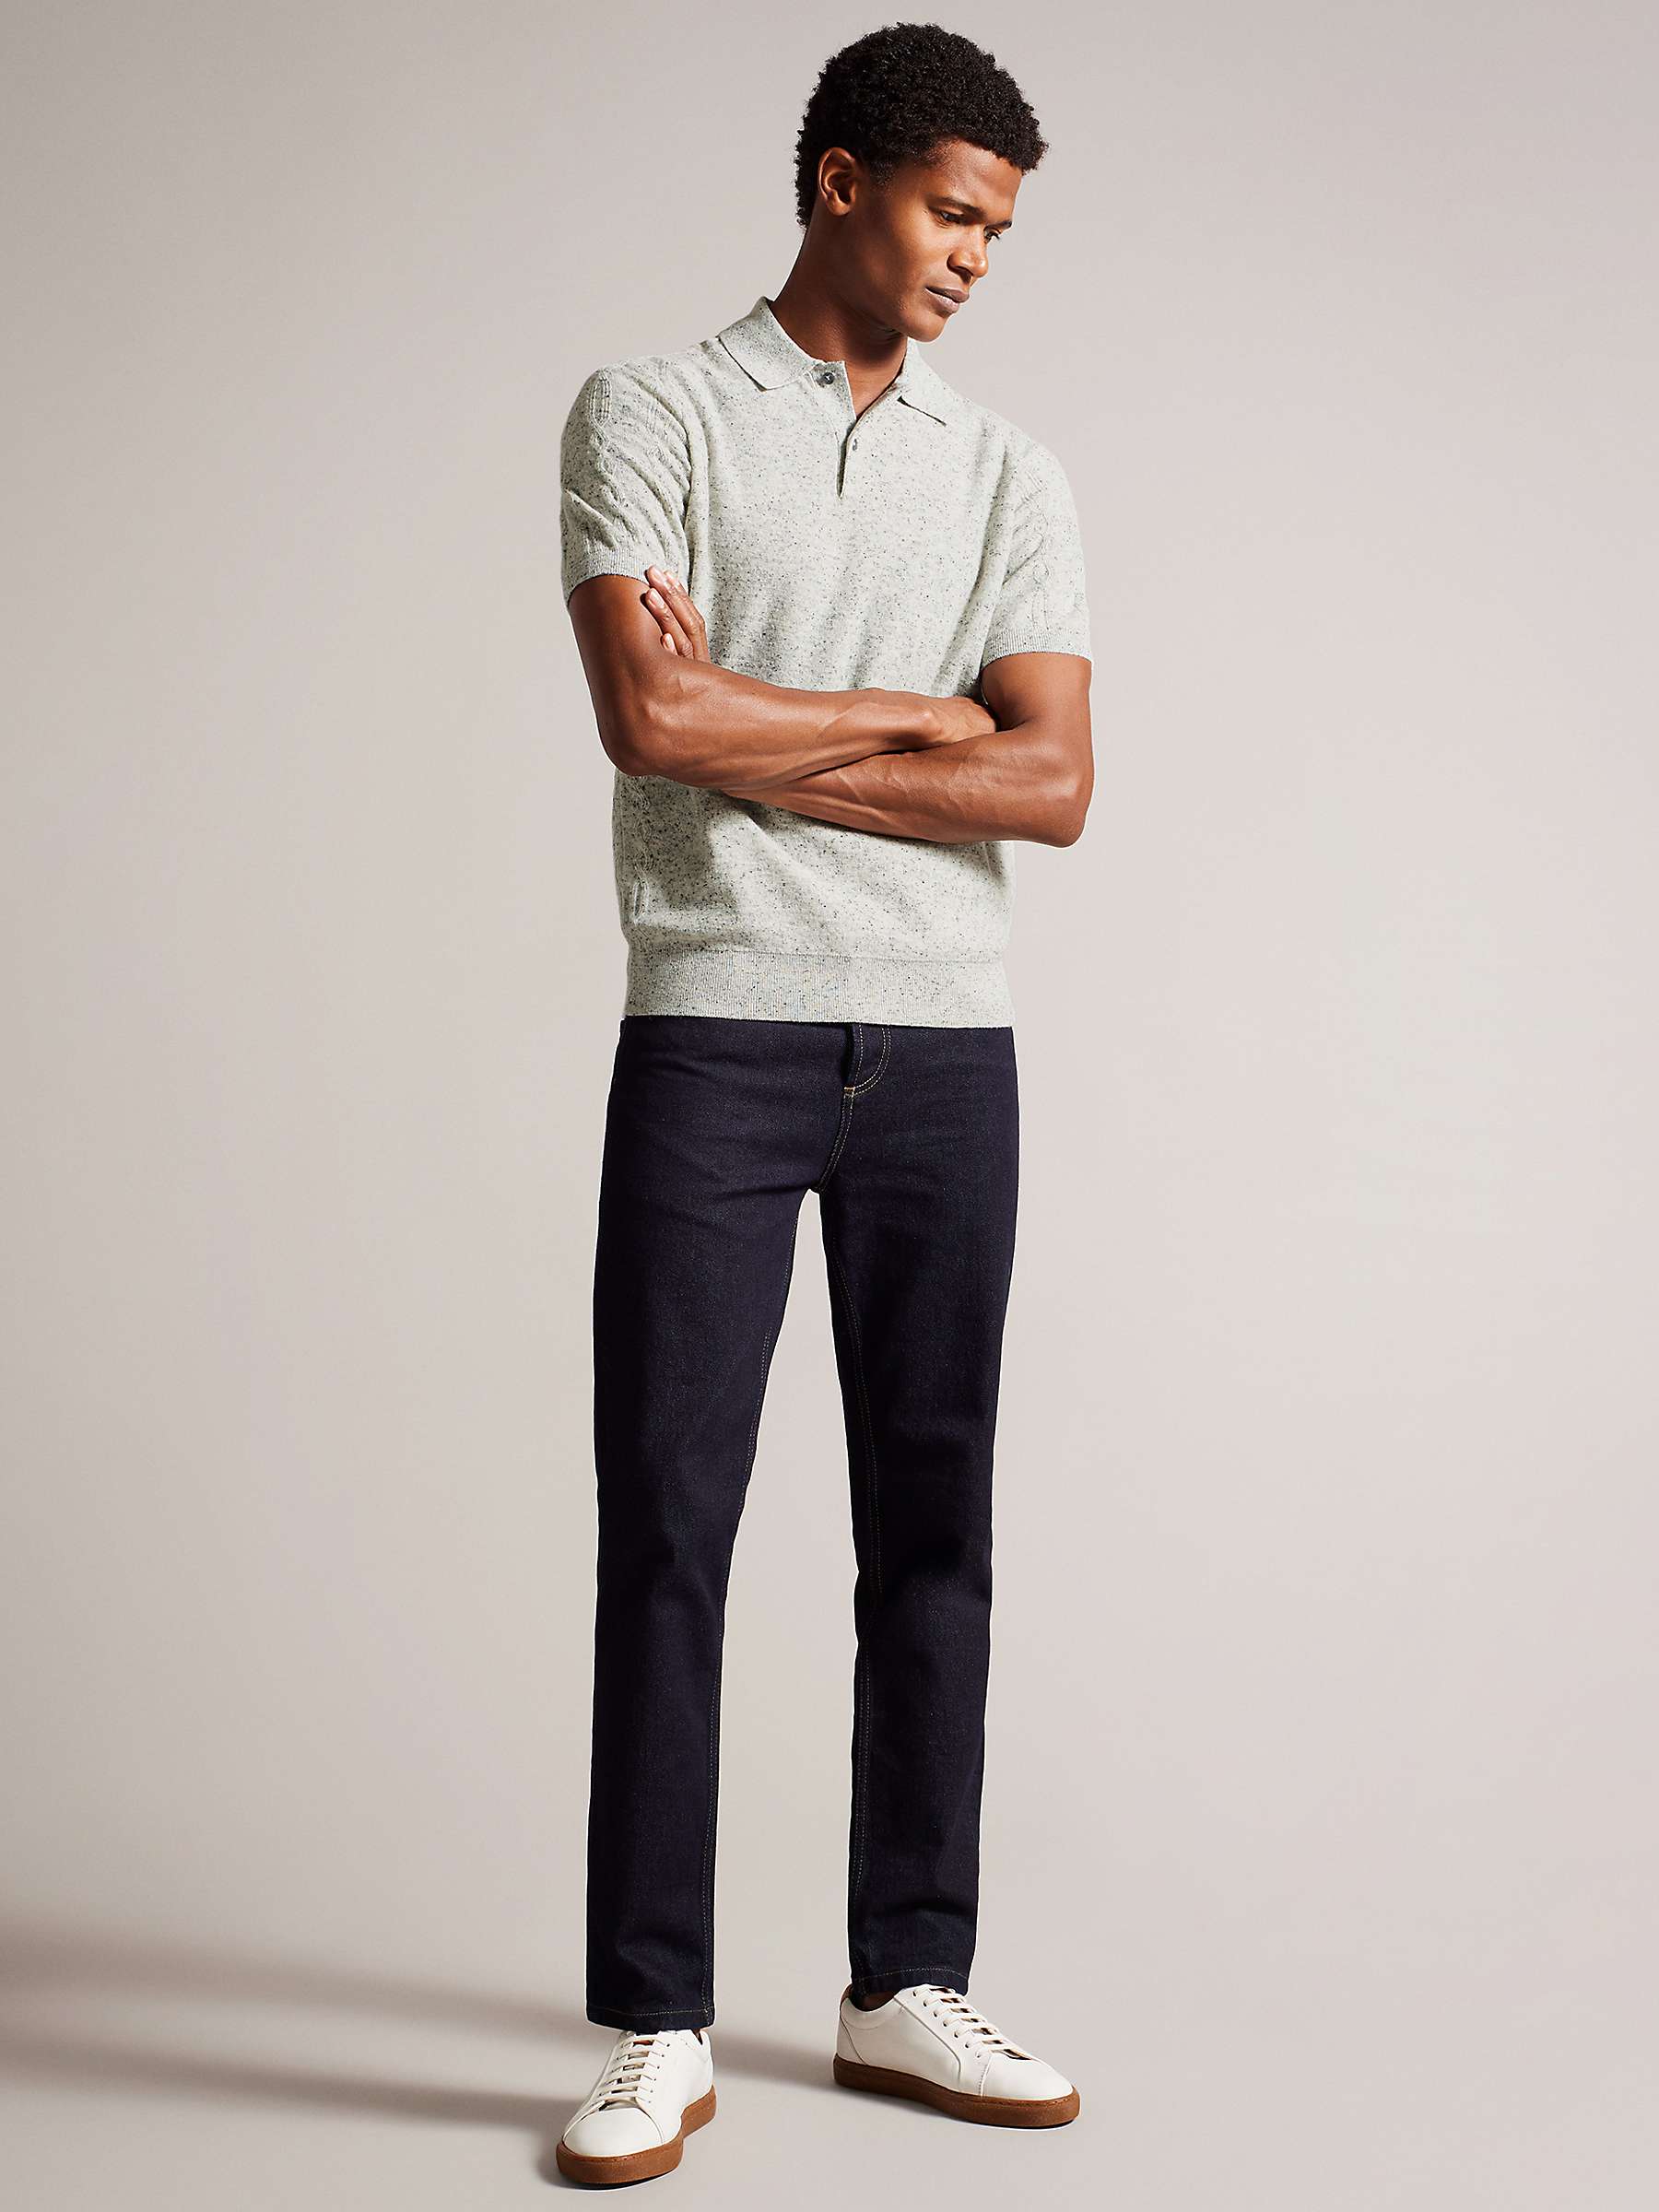 Buy Ted Baker Ustee Short Sleeve Polo Shirt Online at johnlewis.com